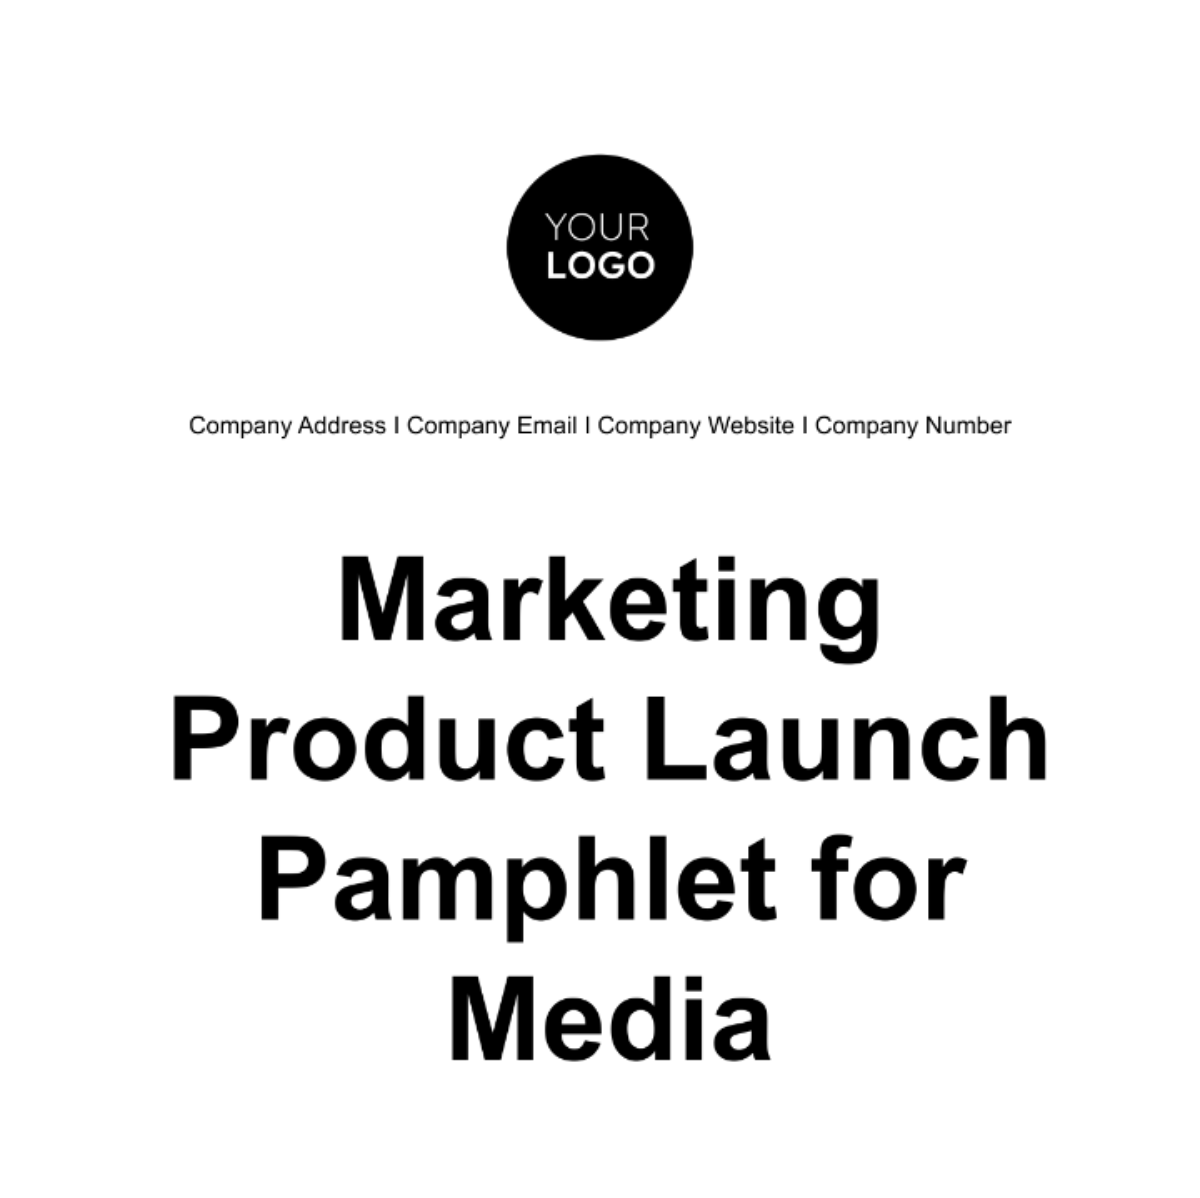 Marketing Product Launch Pamphlet for Media Template